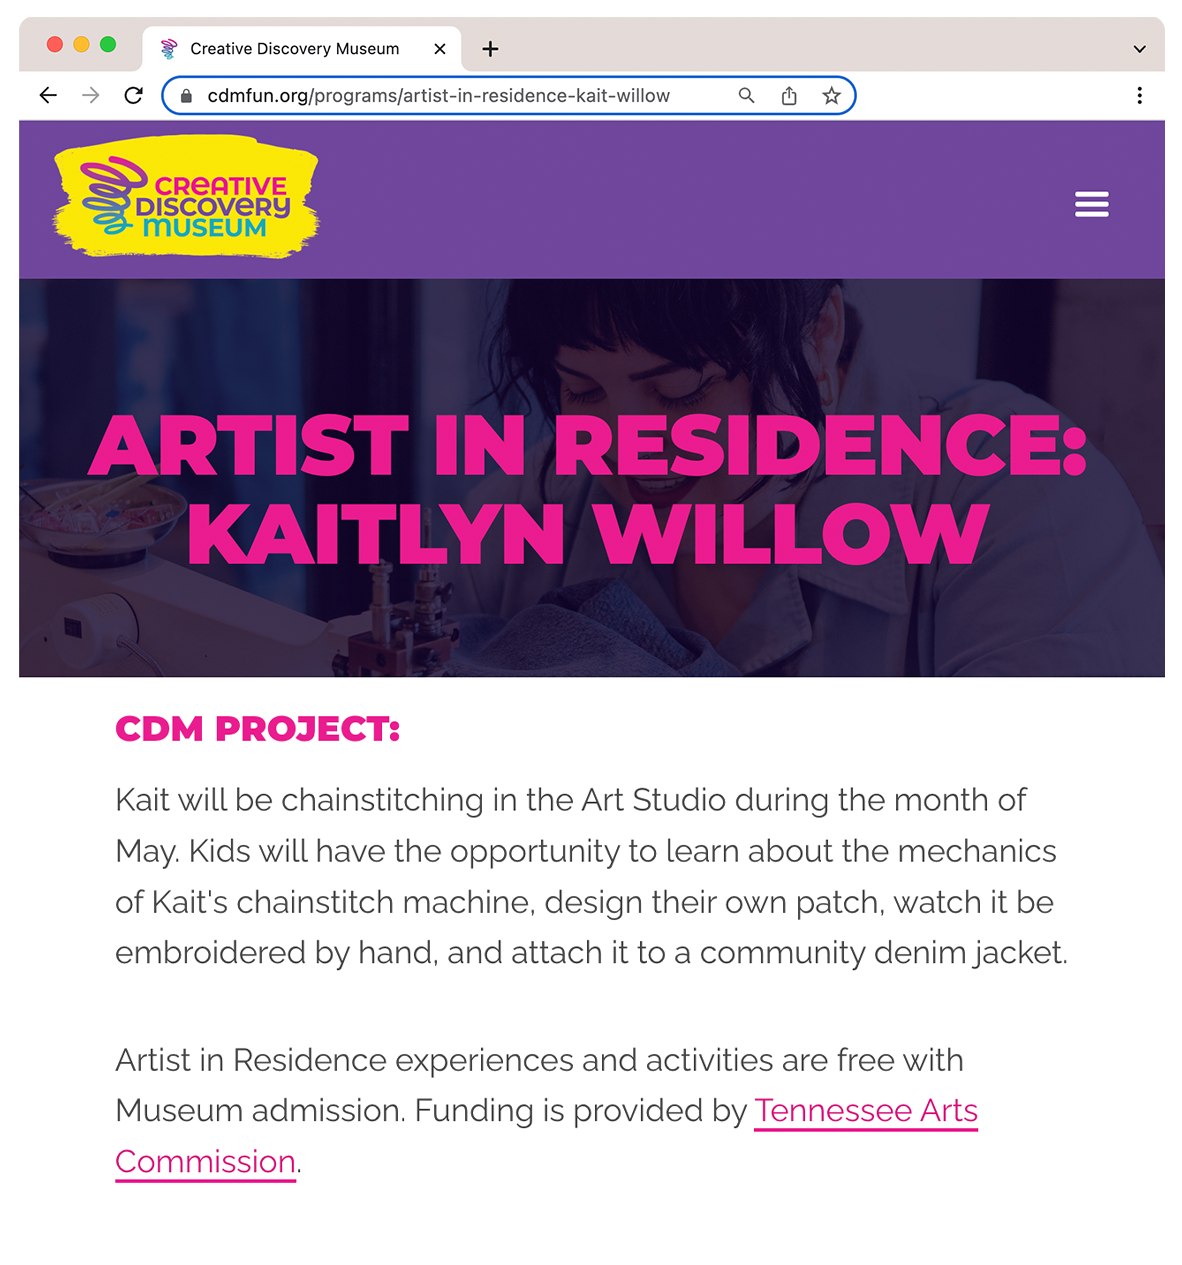 Creative Discovery Museum Website Artist in Residence: Kaitlyn Willow